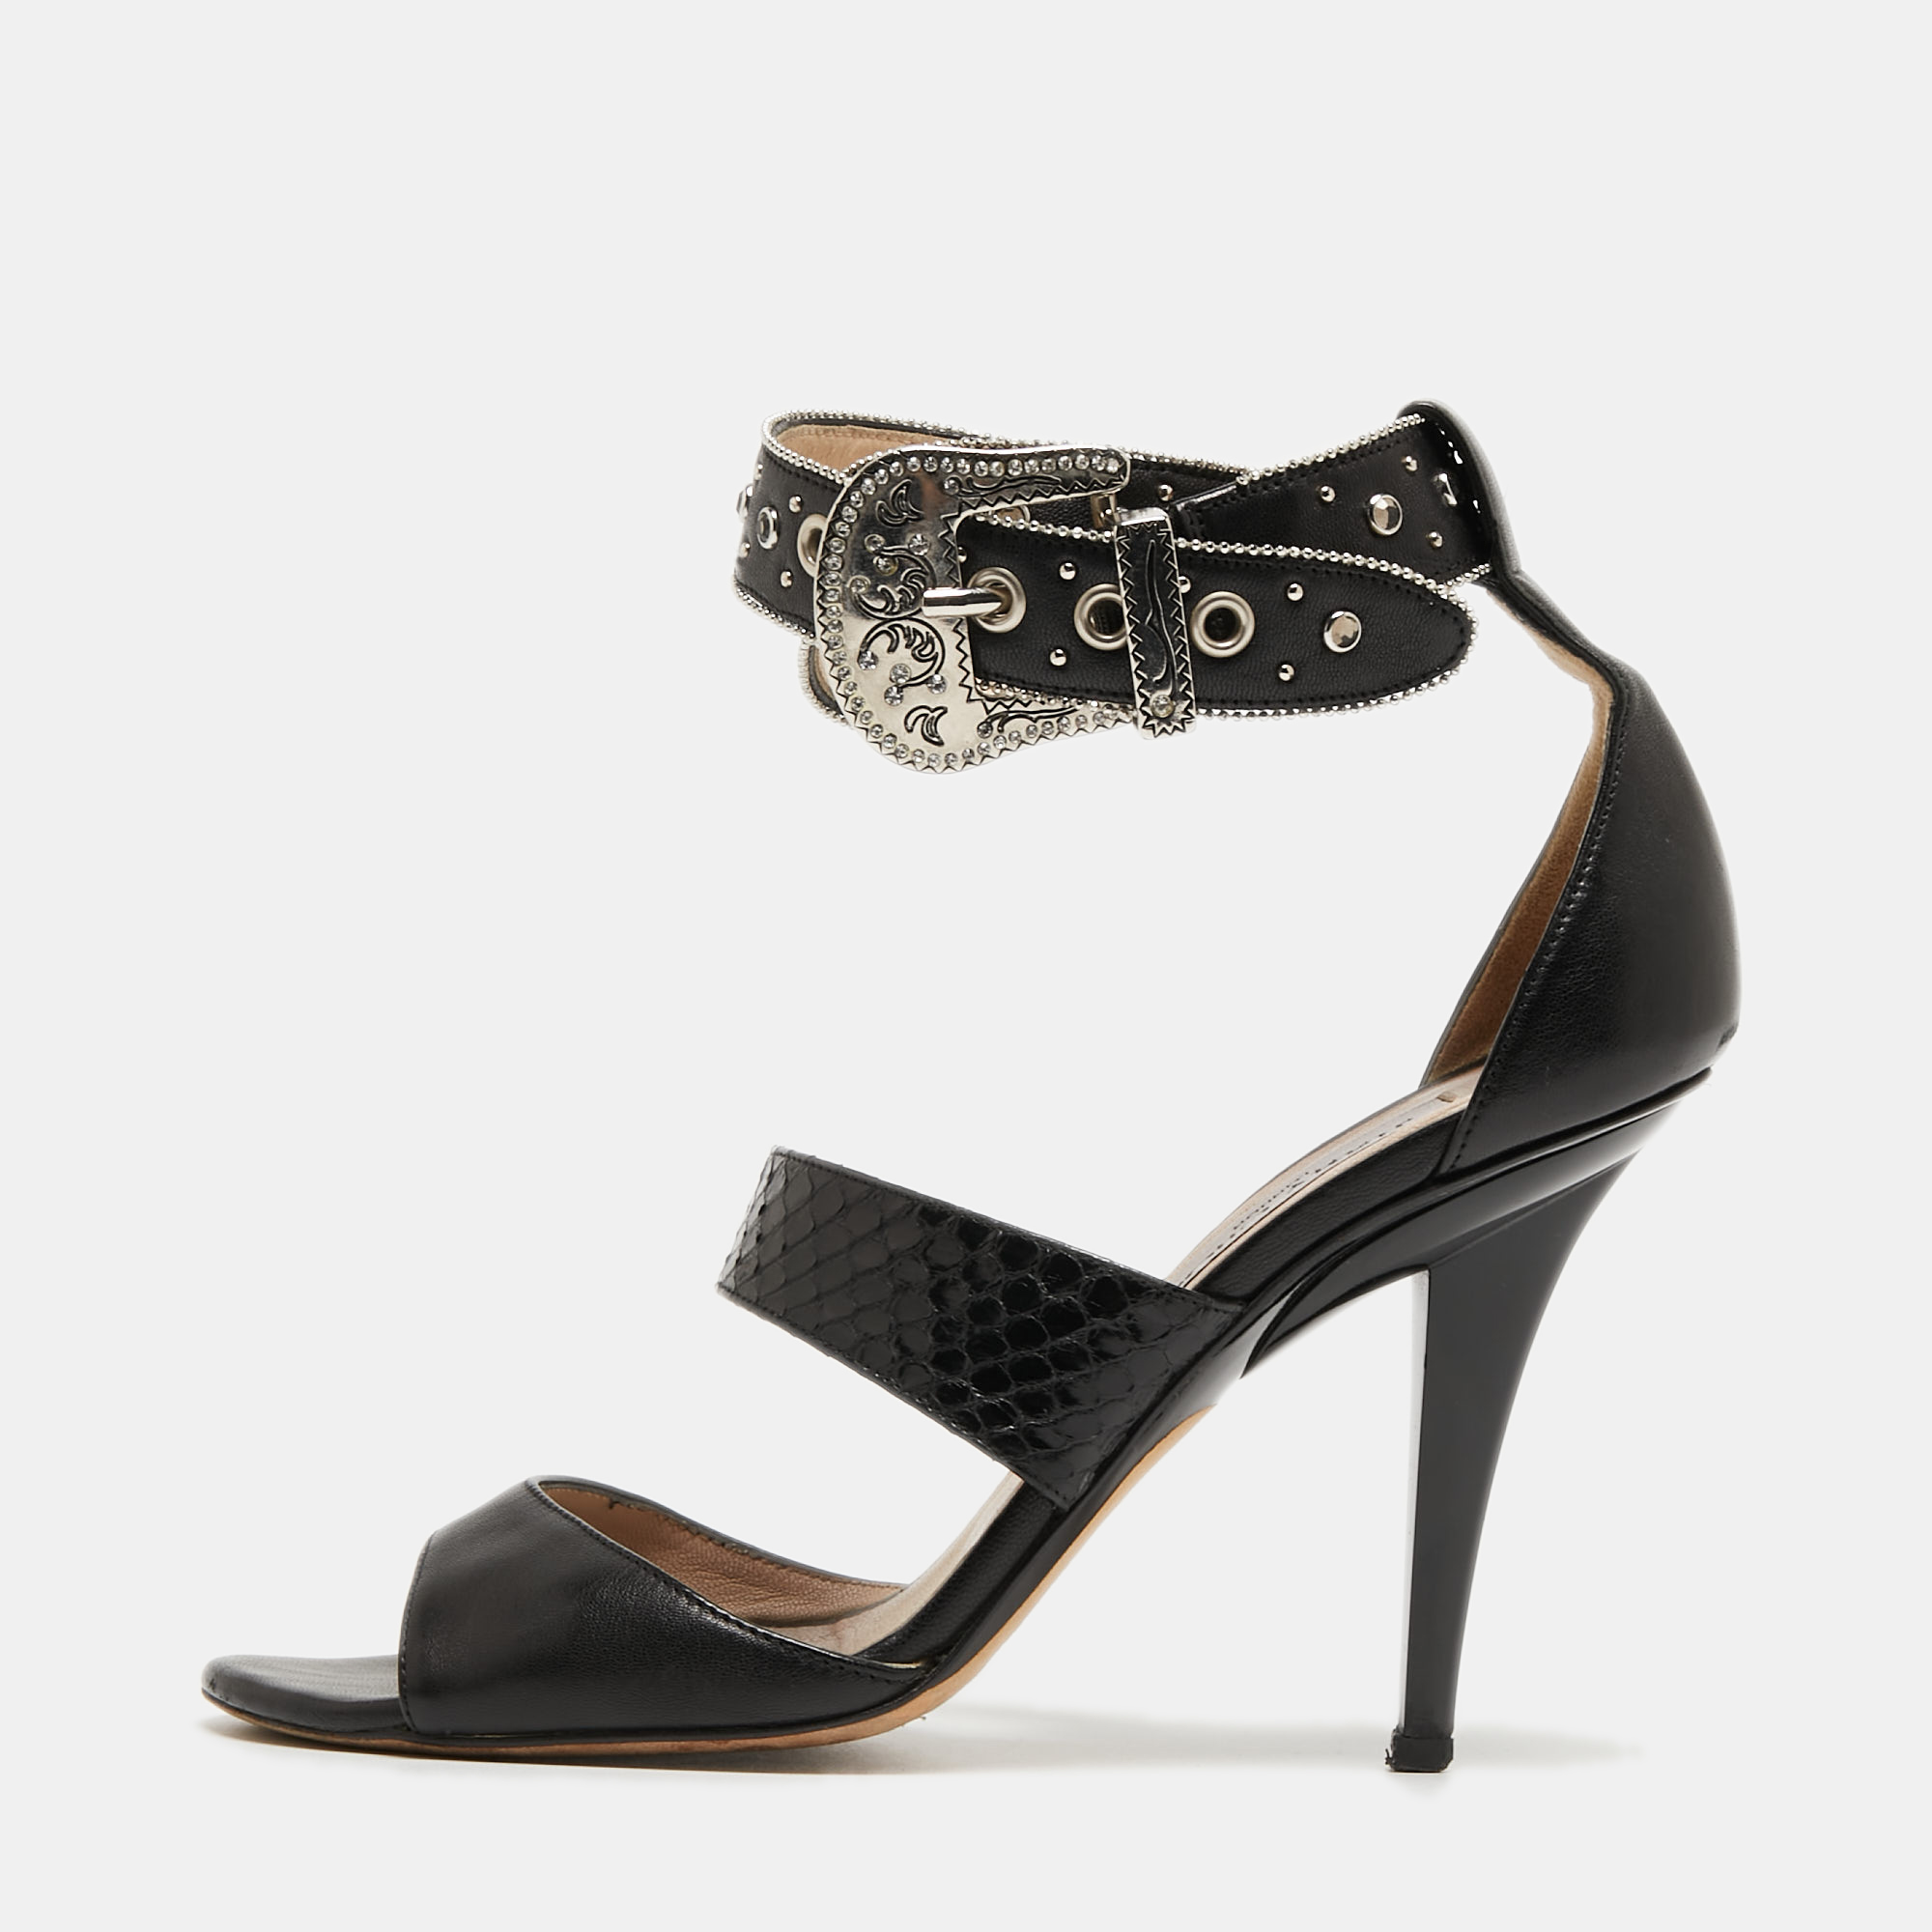 Pre-owned Jimmy Choo Black Embossed Python And Leather Studded Ankle Wrap Sandals Size 37